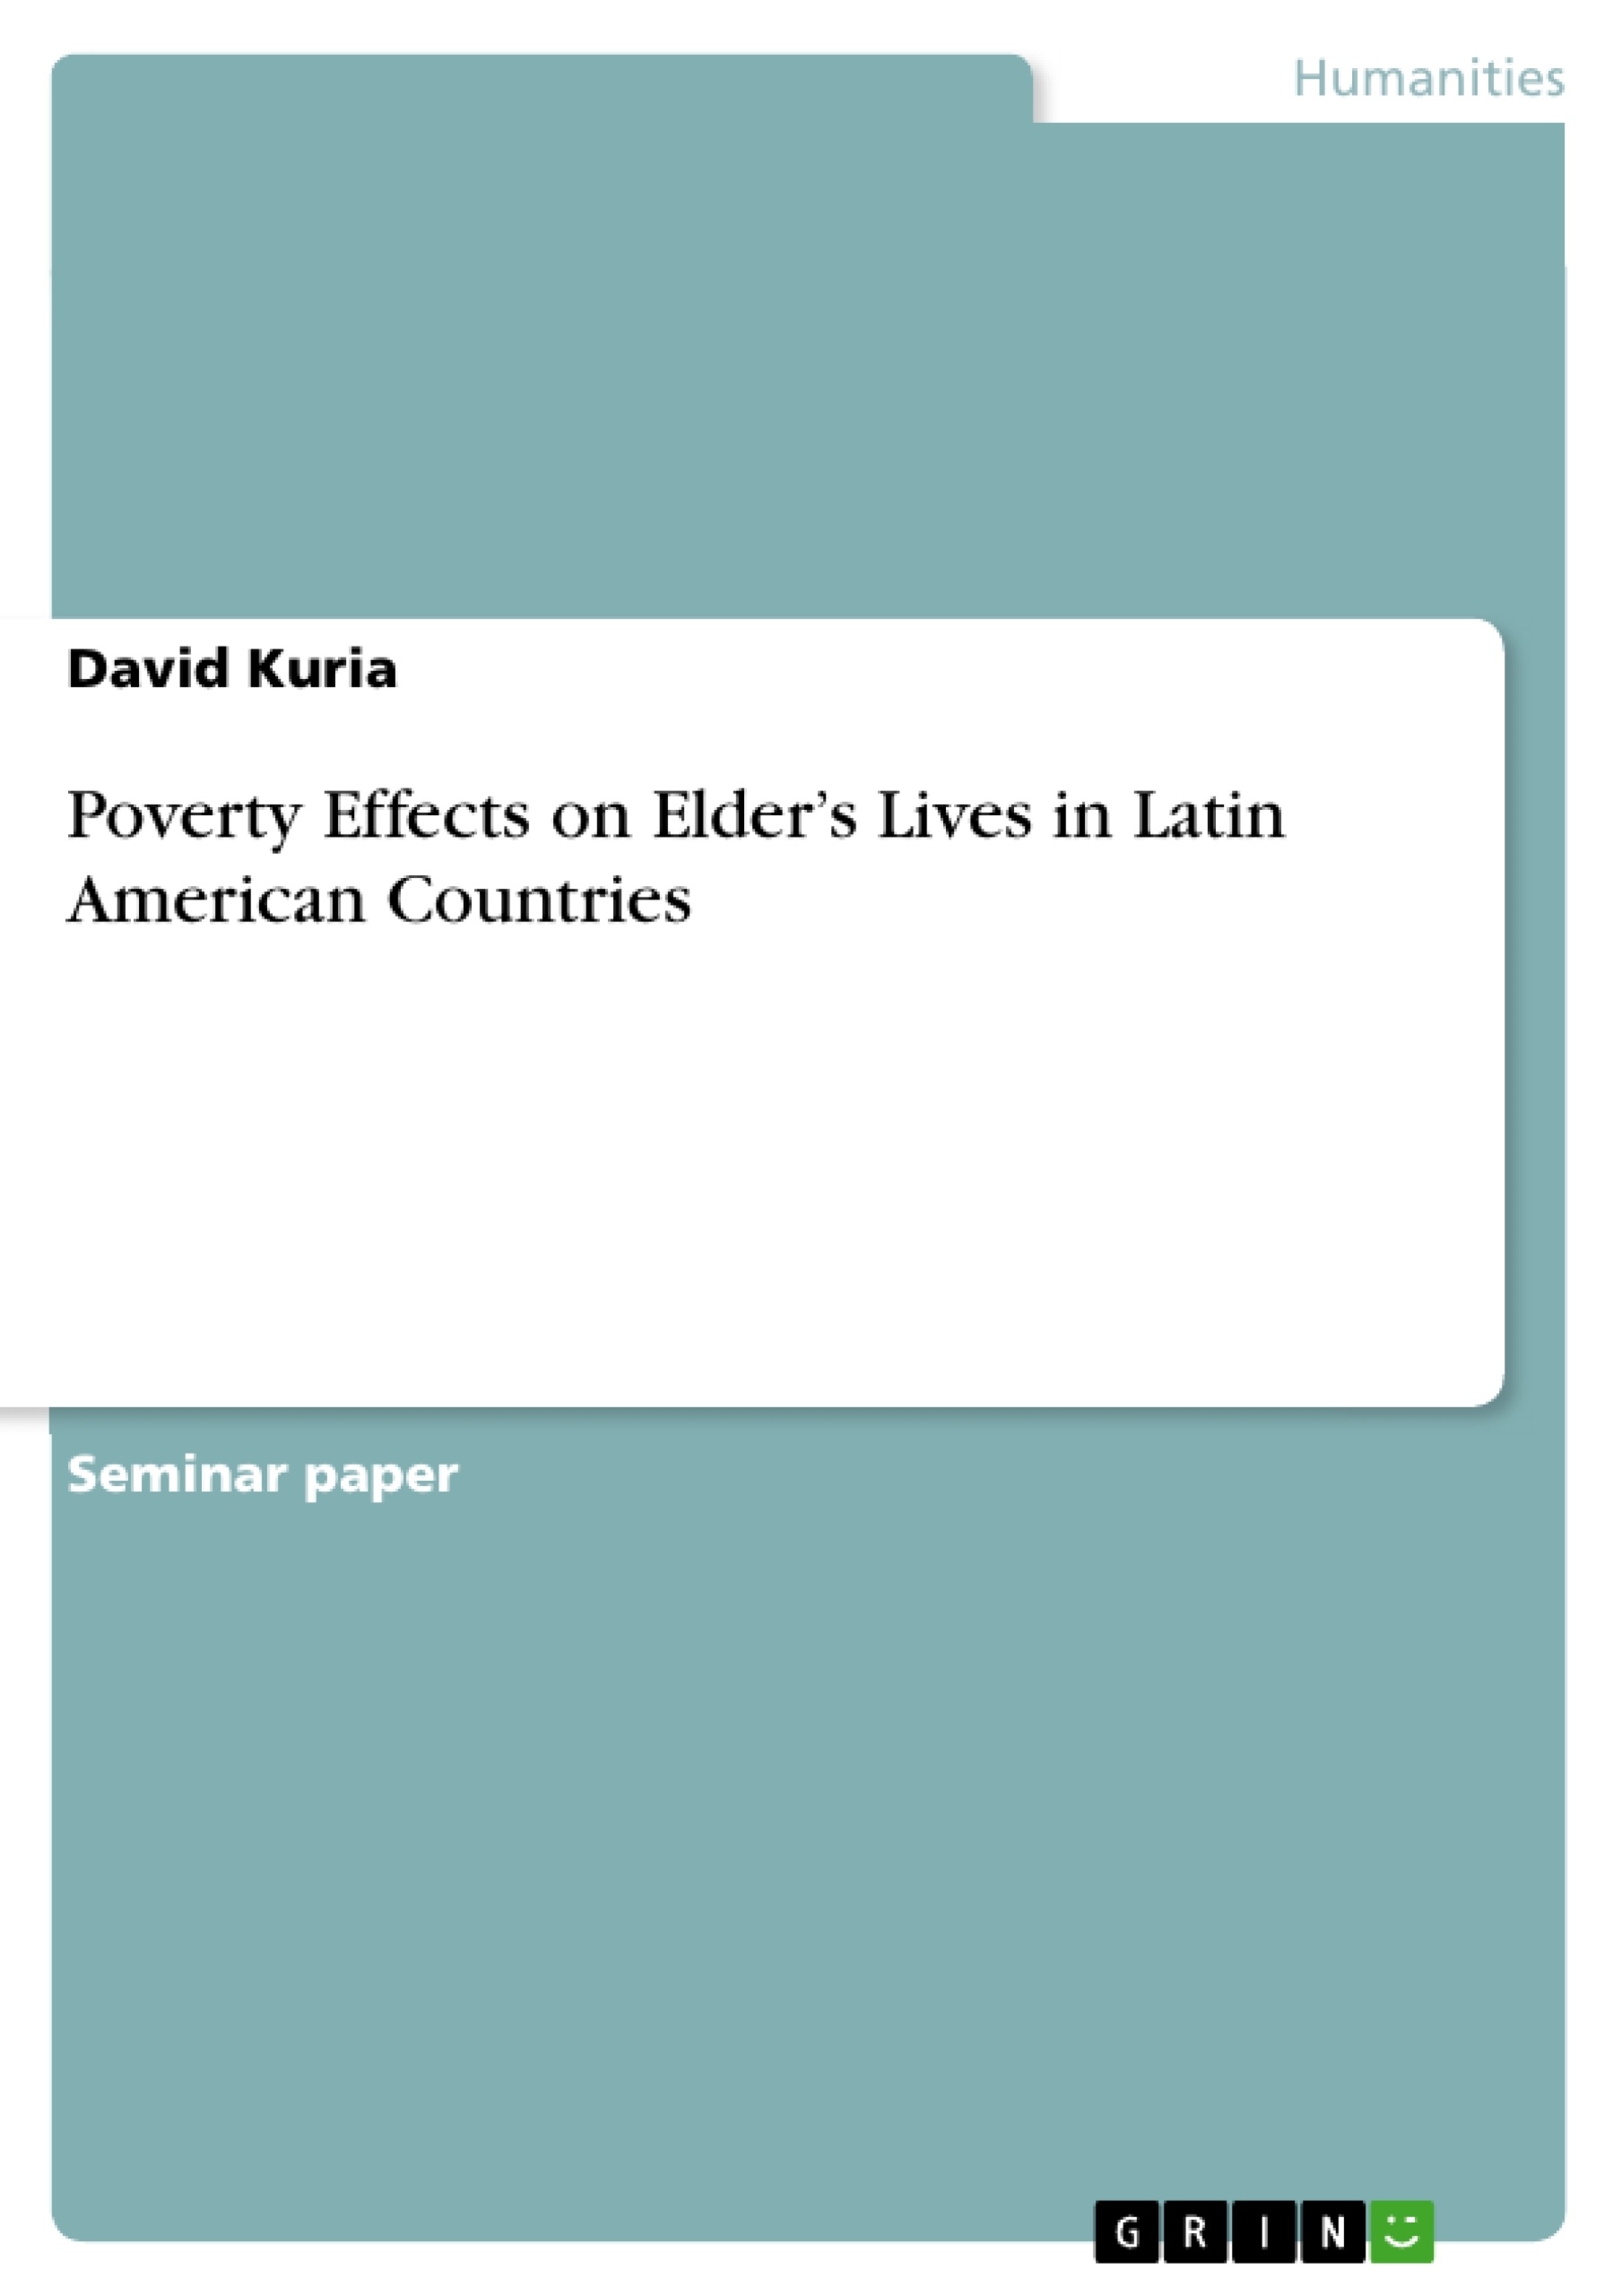 Title: Poverty Effects on Elder’s Lives in Latin American Countries